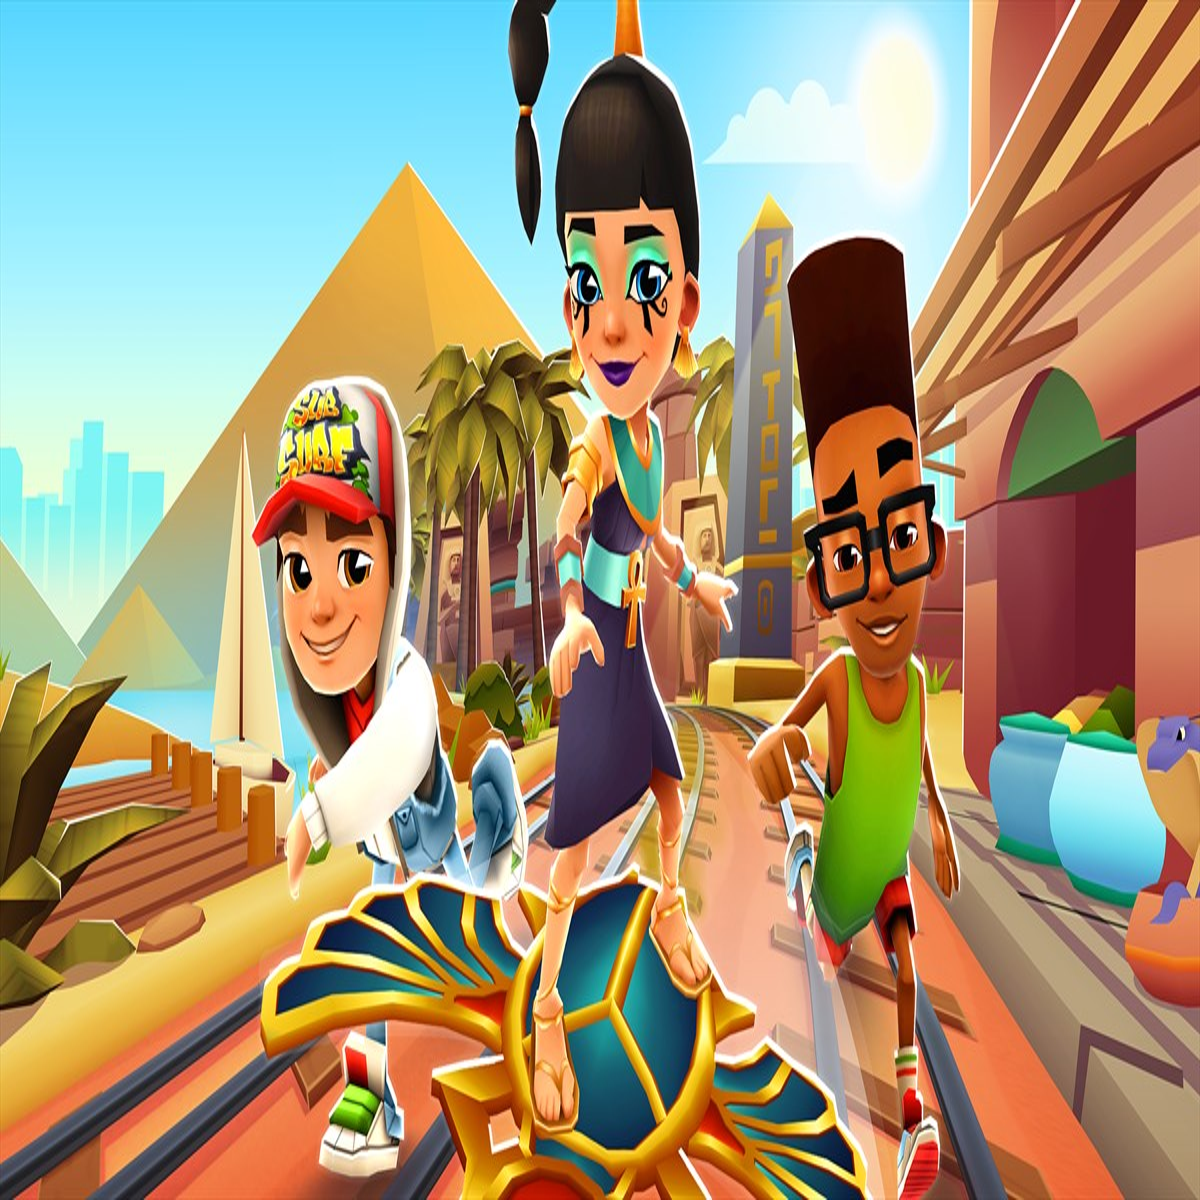 Subway Surfers – Apps on Google Play